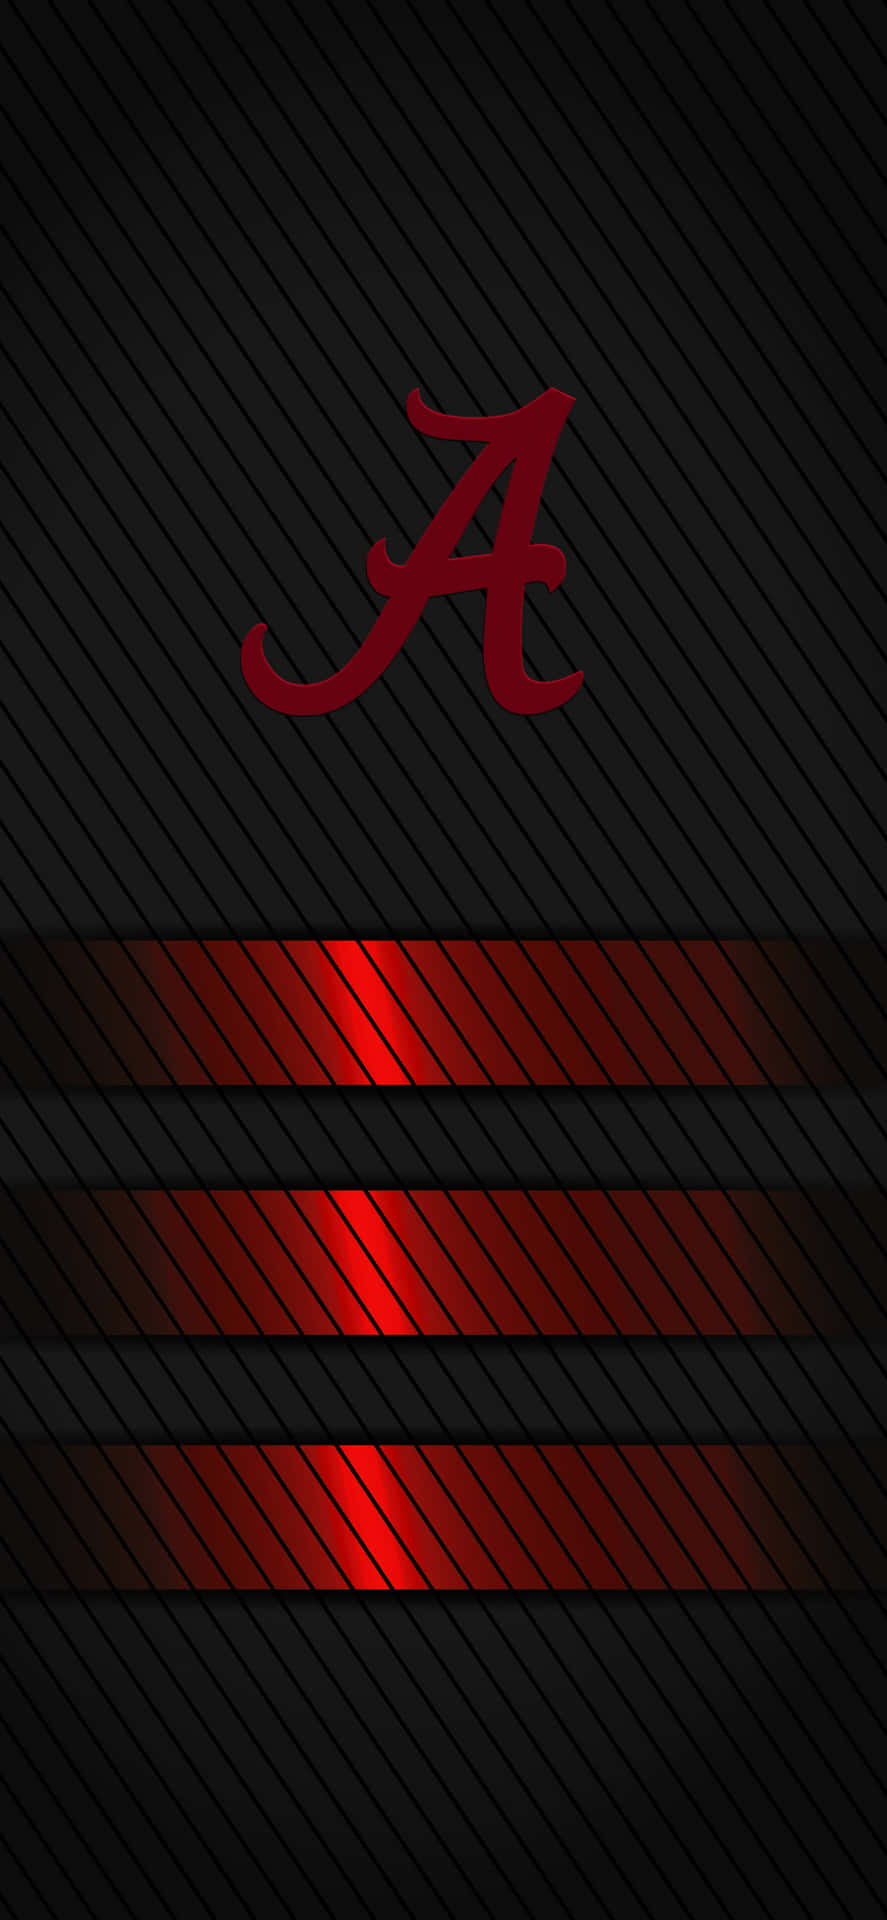 Rolling With The Tide